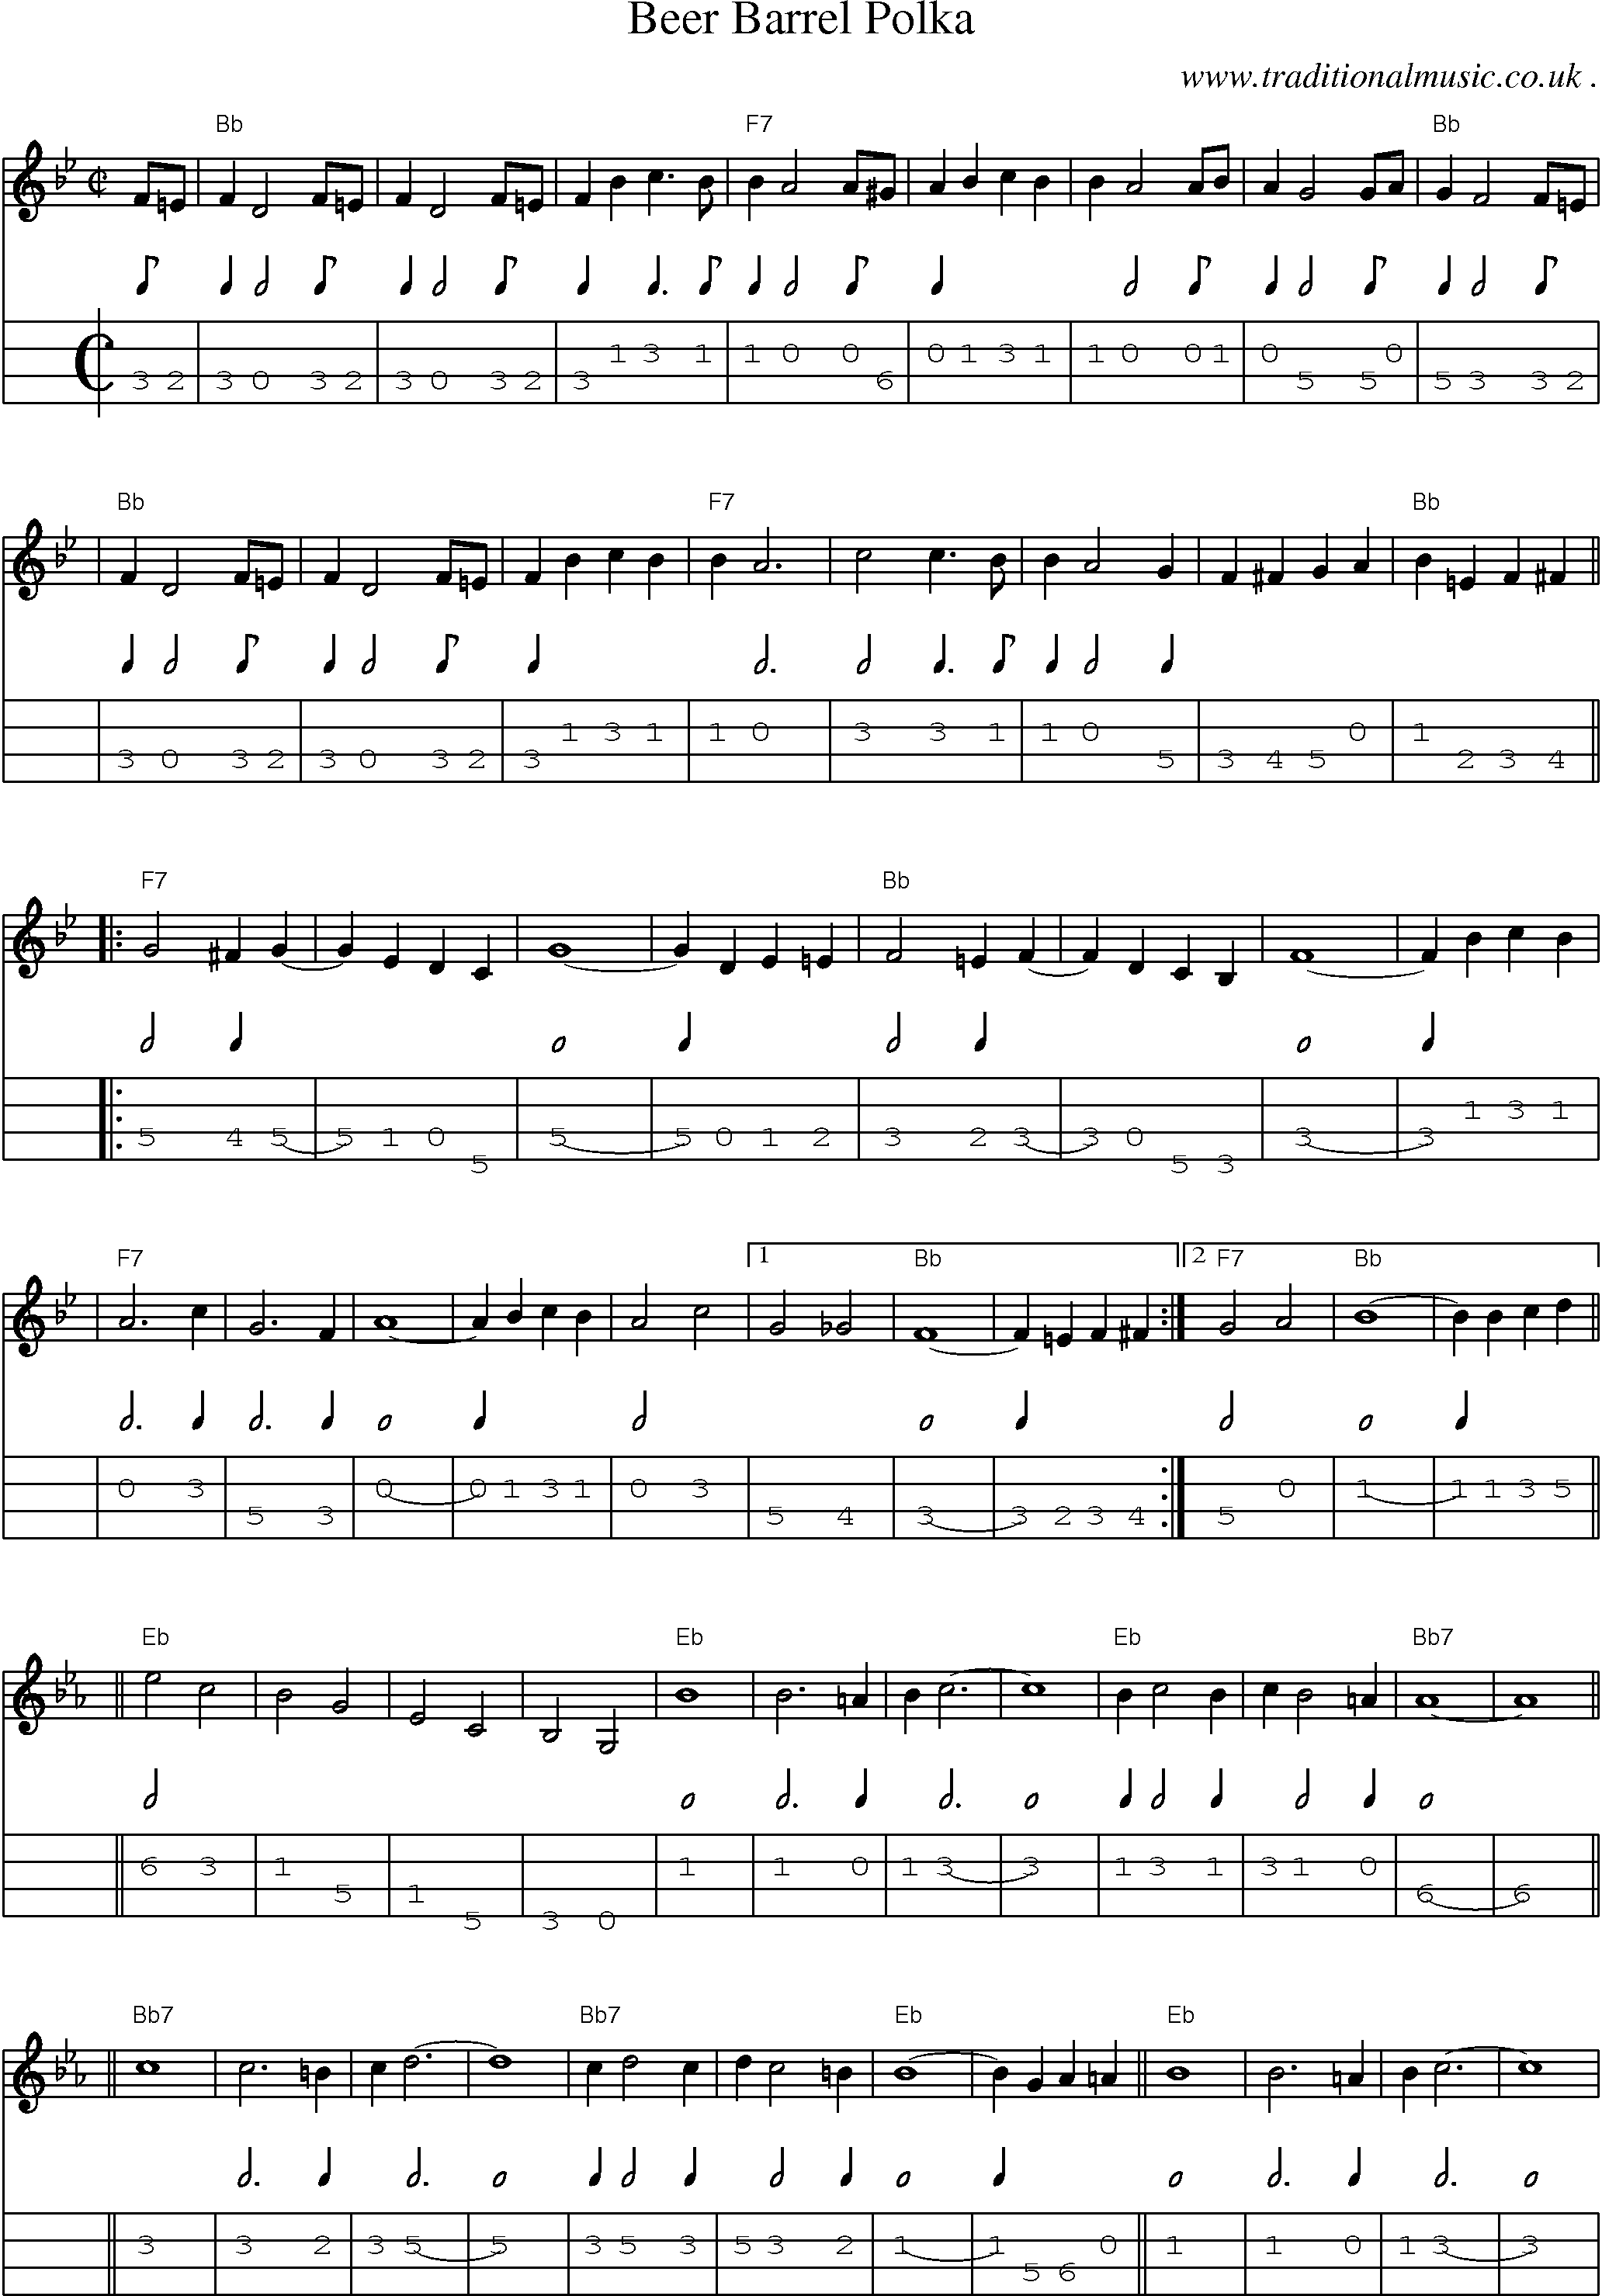 Music Score and Guitar Tabs for Beer Barrel Polka